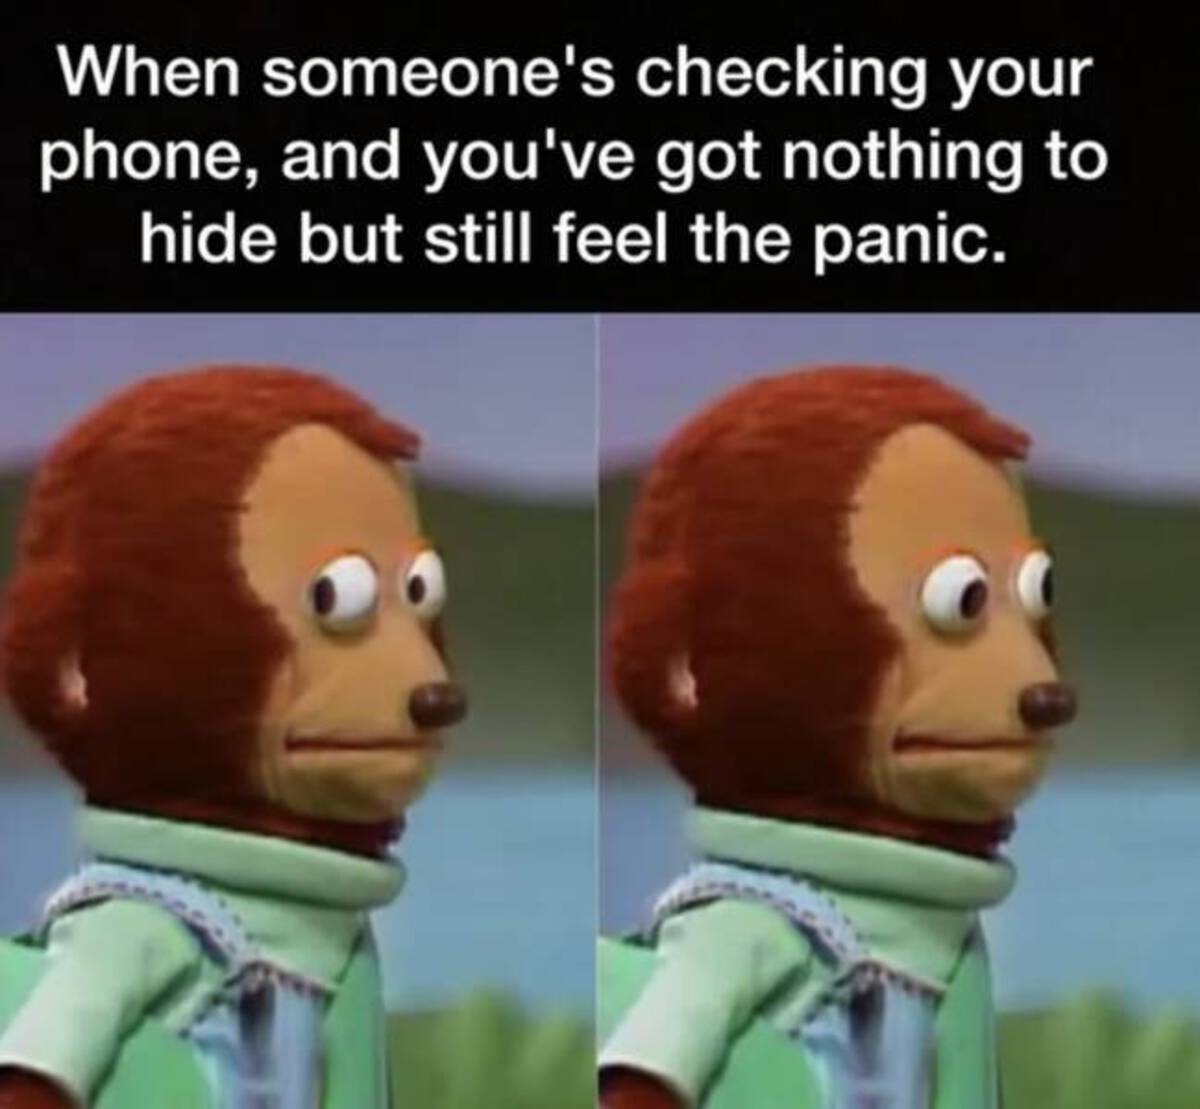 memes for cool people - When someone's checking your phone, and you've got nothing to hide but still feel the panic.